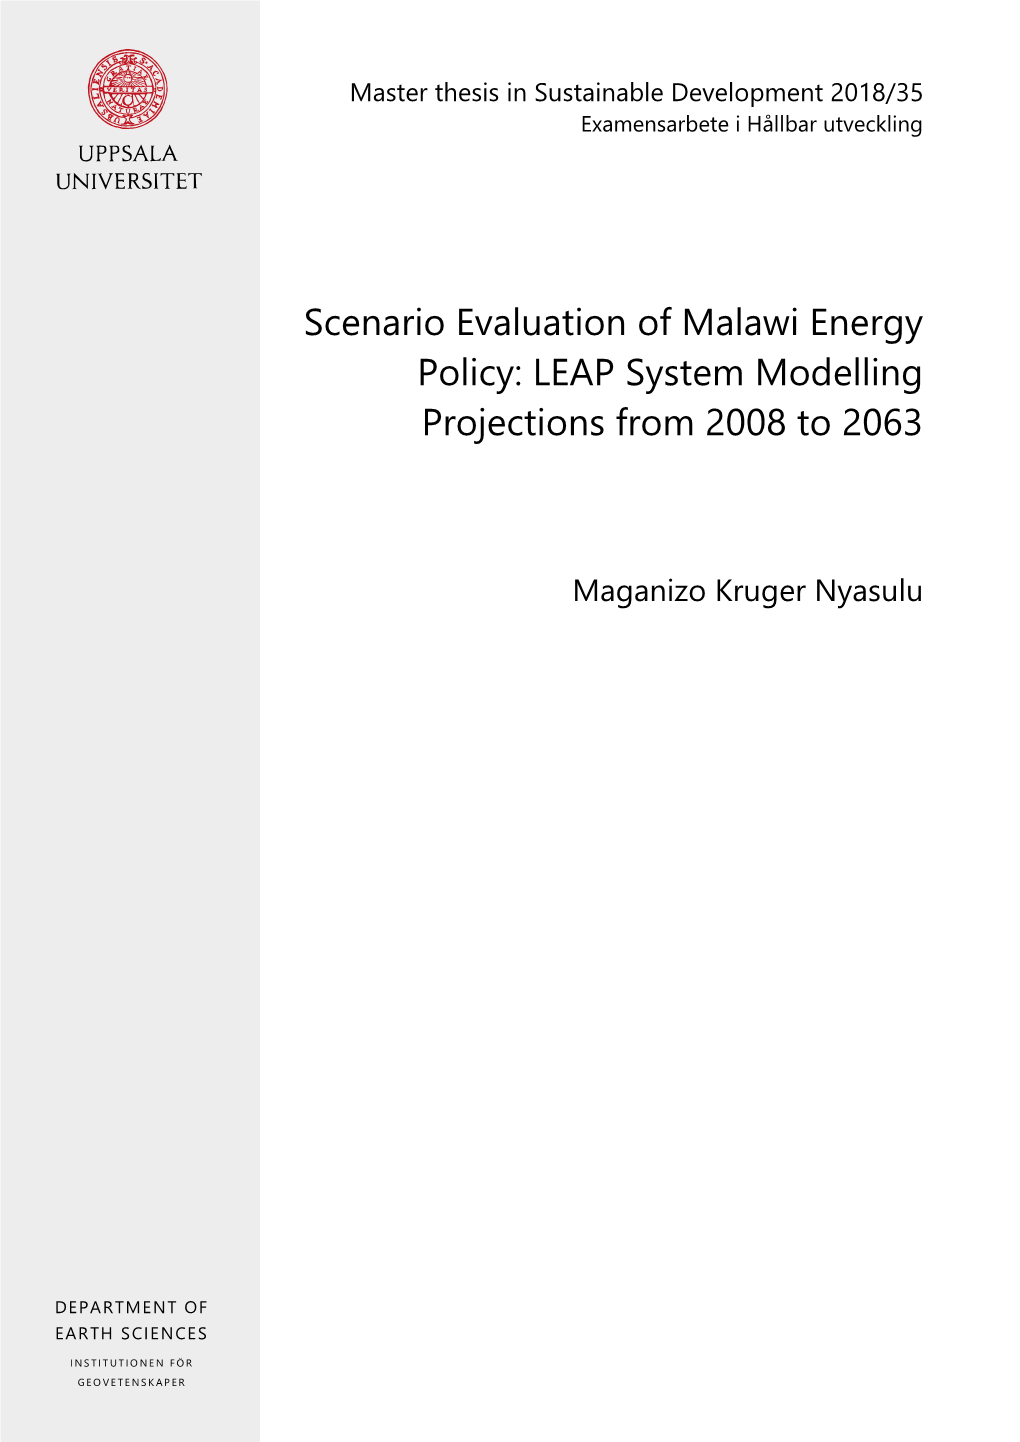 Scenario Evaluation of Malawi Energy Policy: LEAP System Modelling Projections from 2008 to 2063